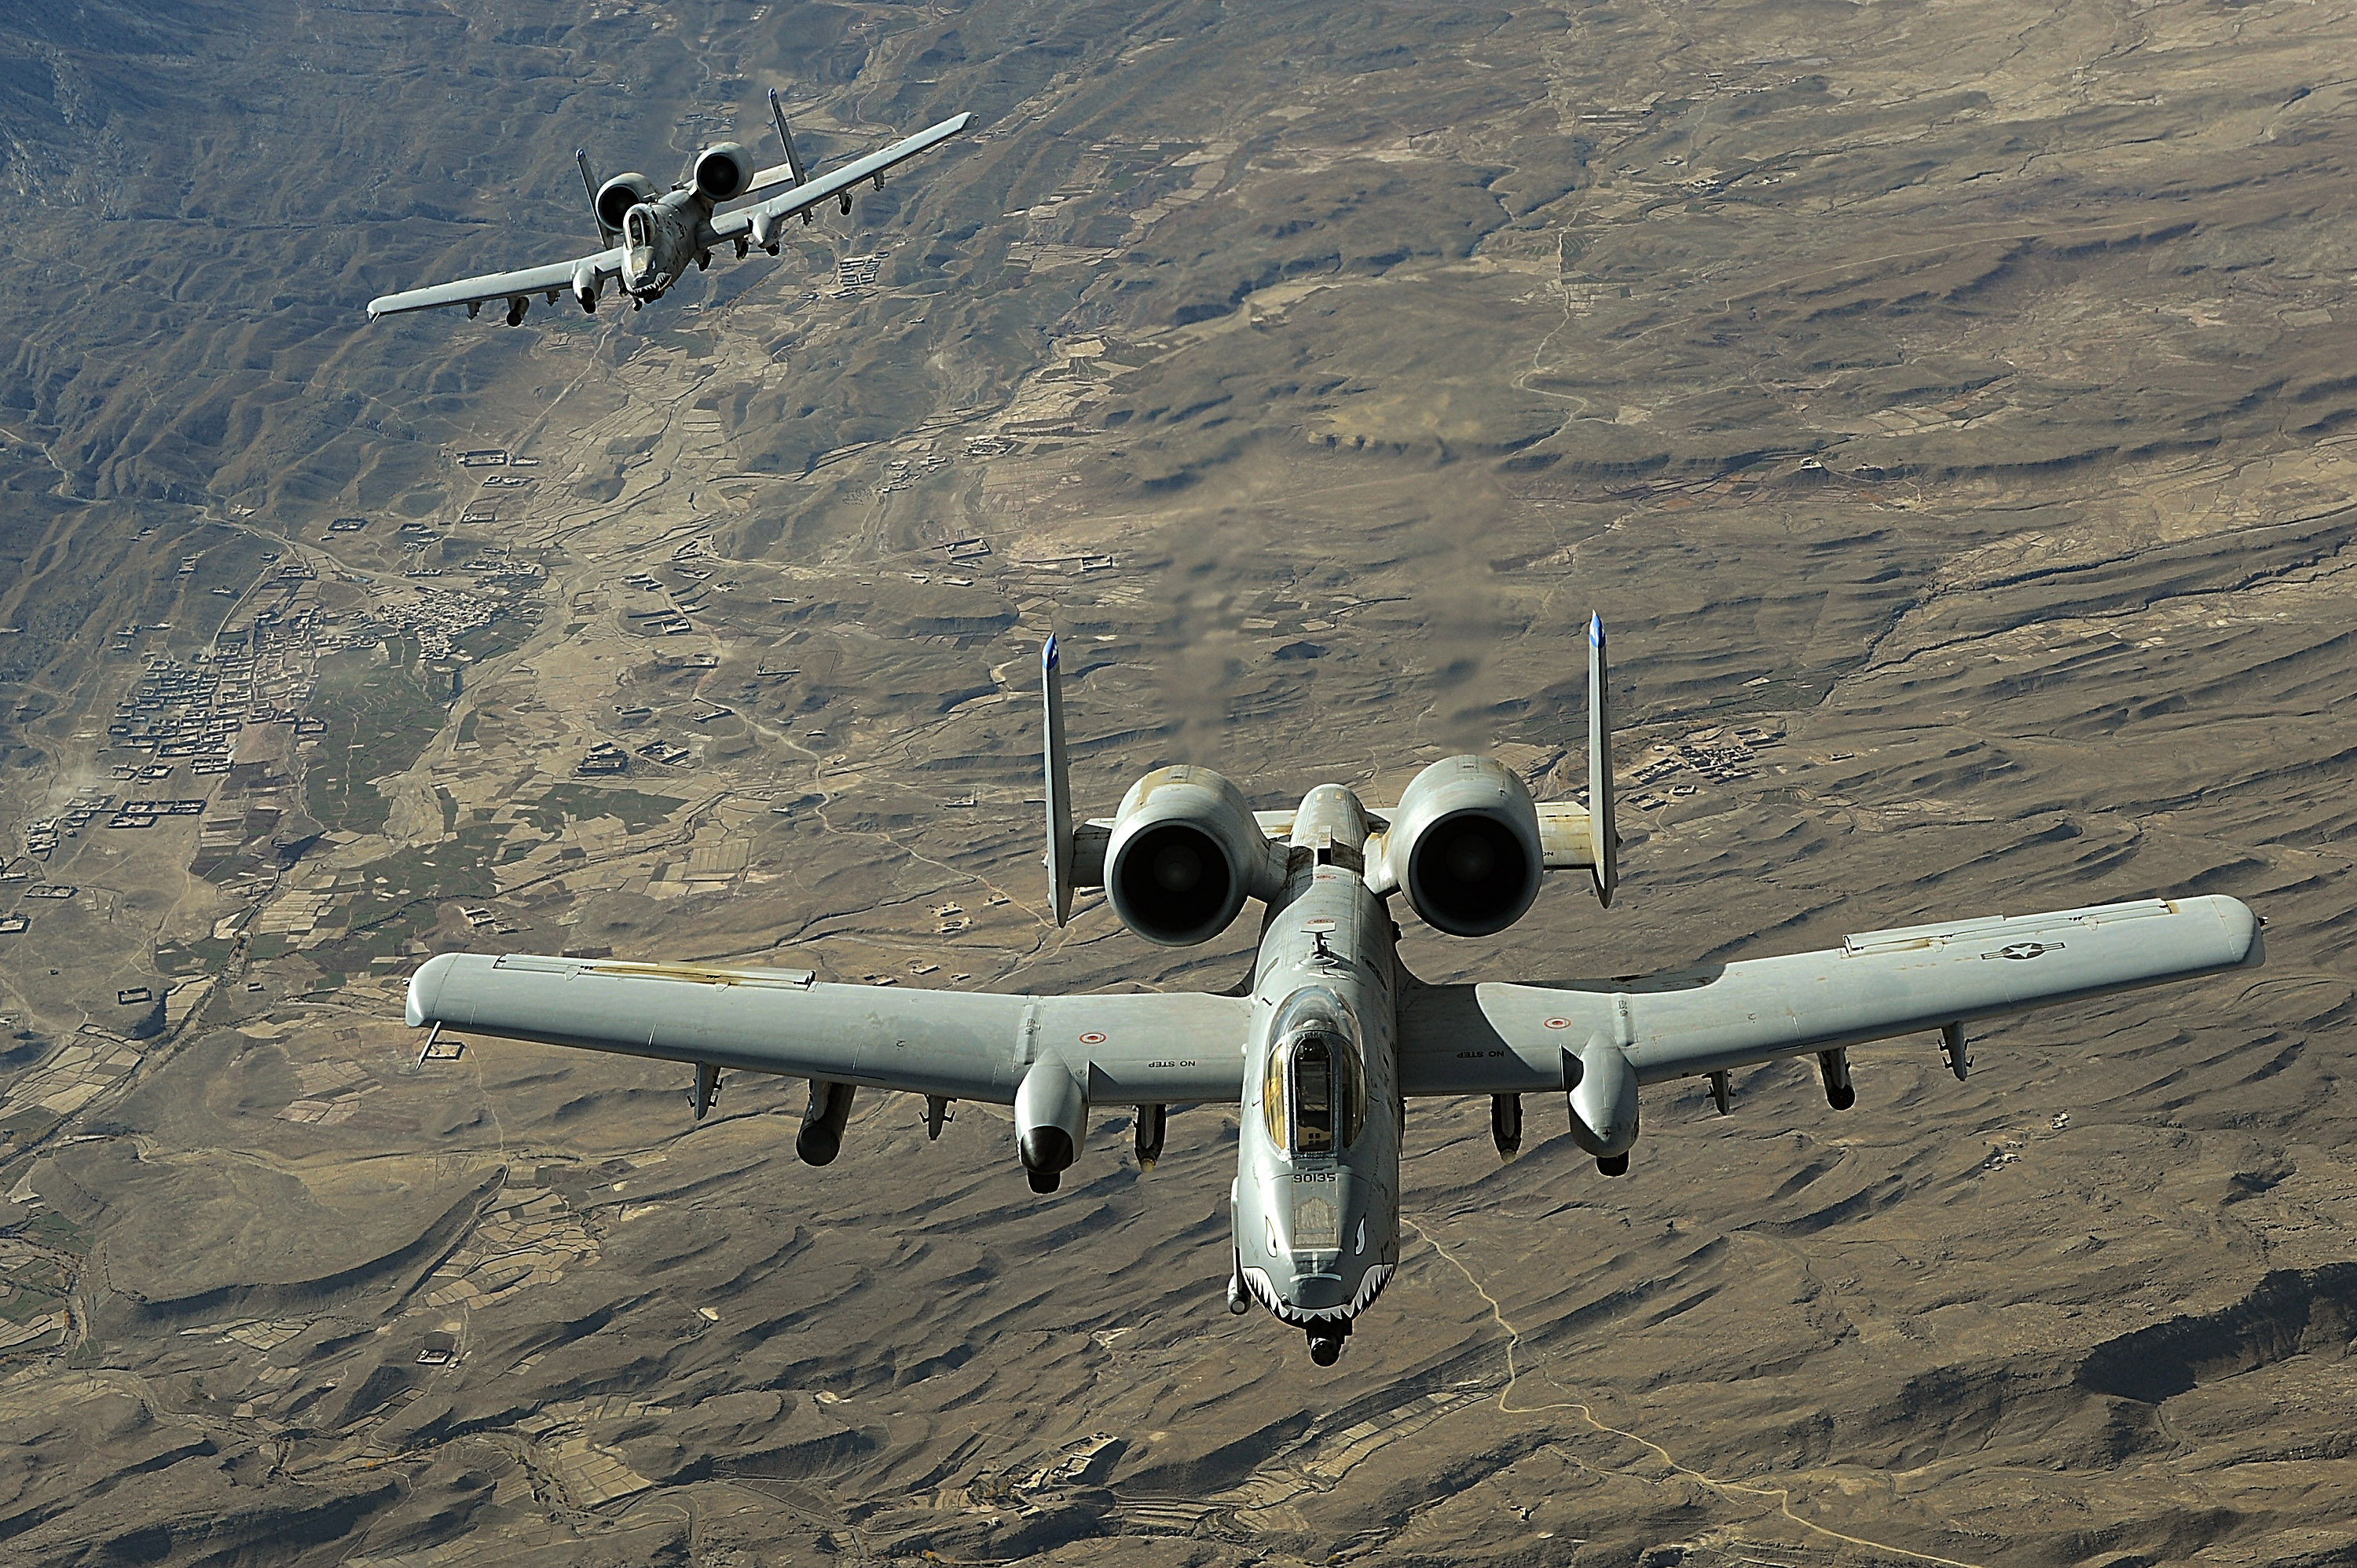 General 3000x1996 aircraft military aircraft Warthog vehicle Fairchild Republic A-10 Thunderbolt II American aircraft flying frontal view landscape